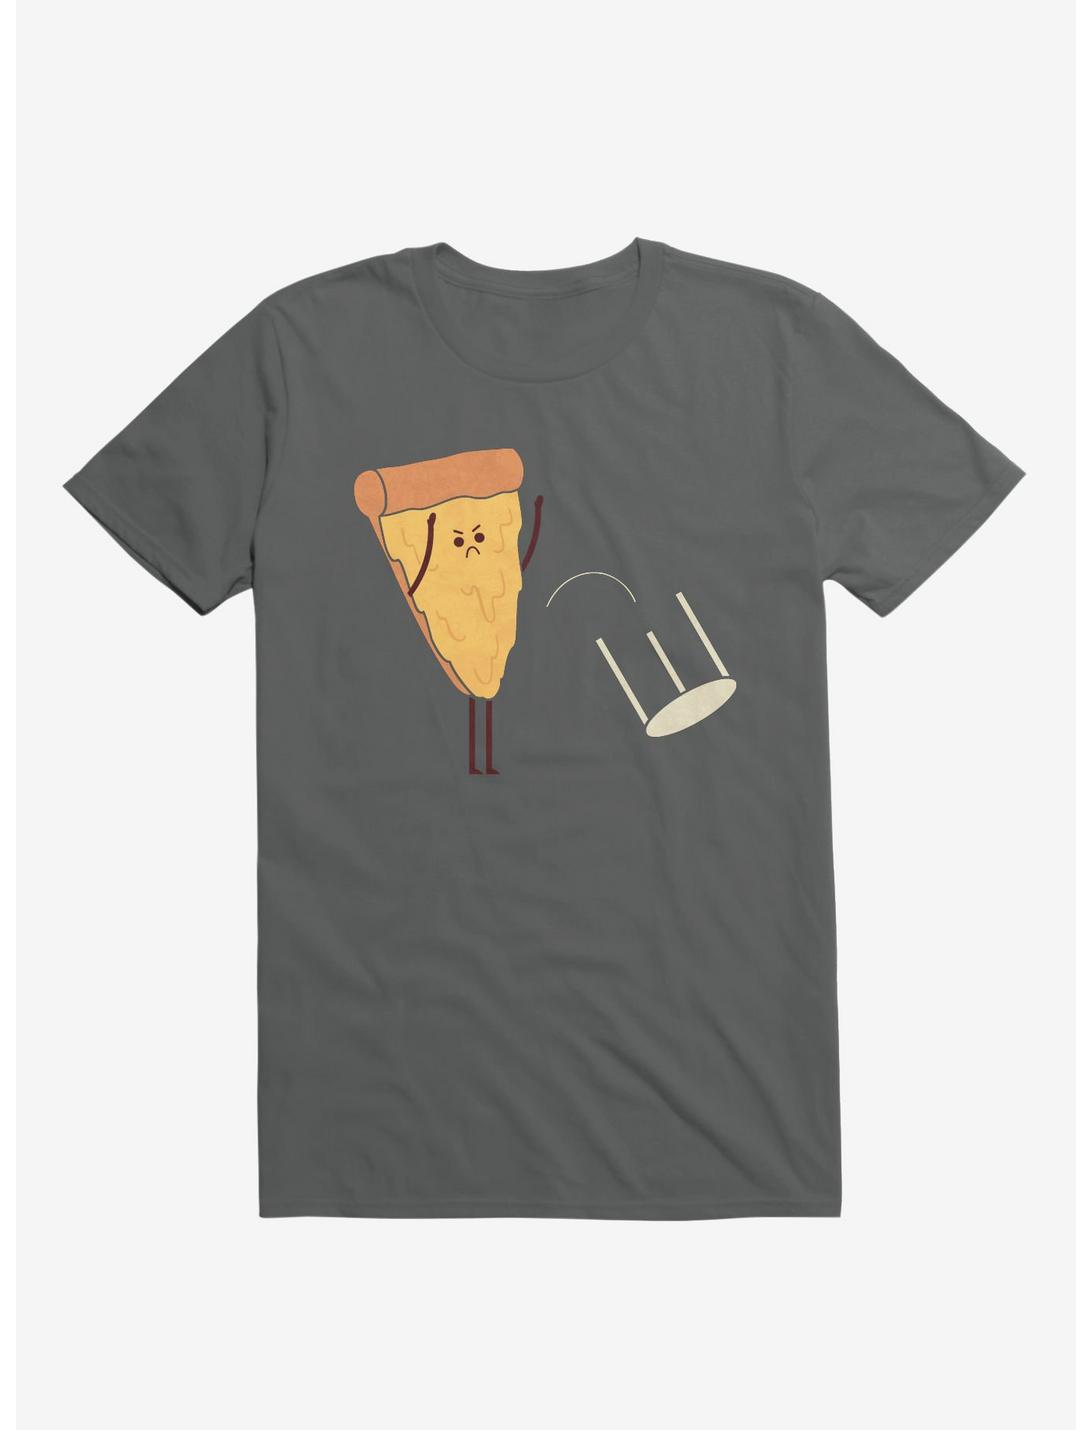 Angry Pizza Flips Table Charcoal Grey T-Shirt, CHARCOAL, hi-res